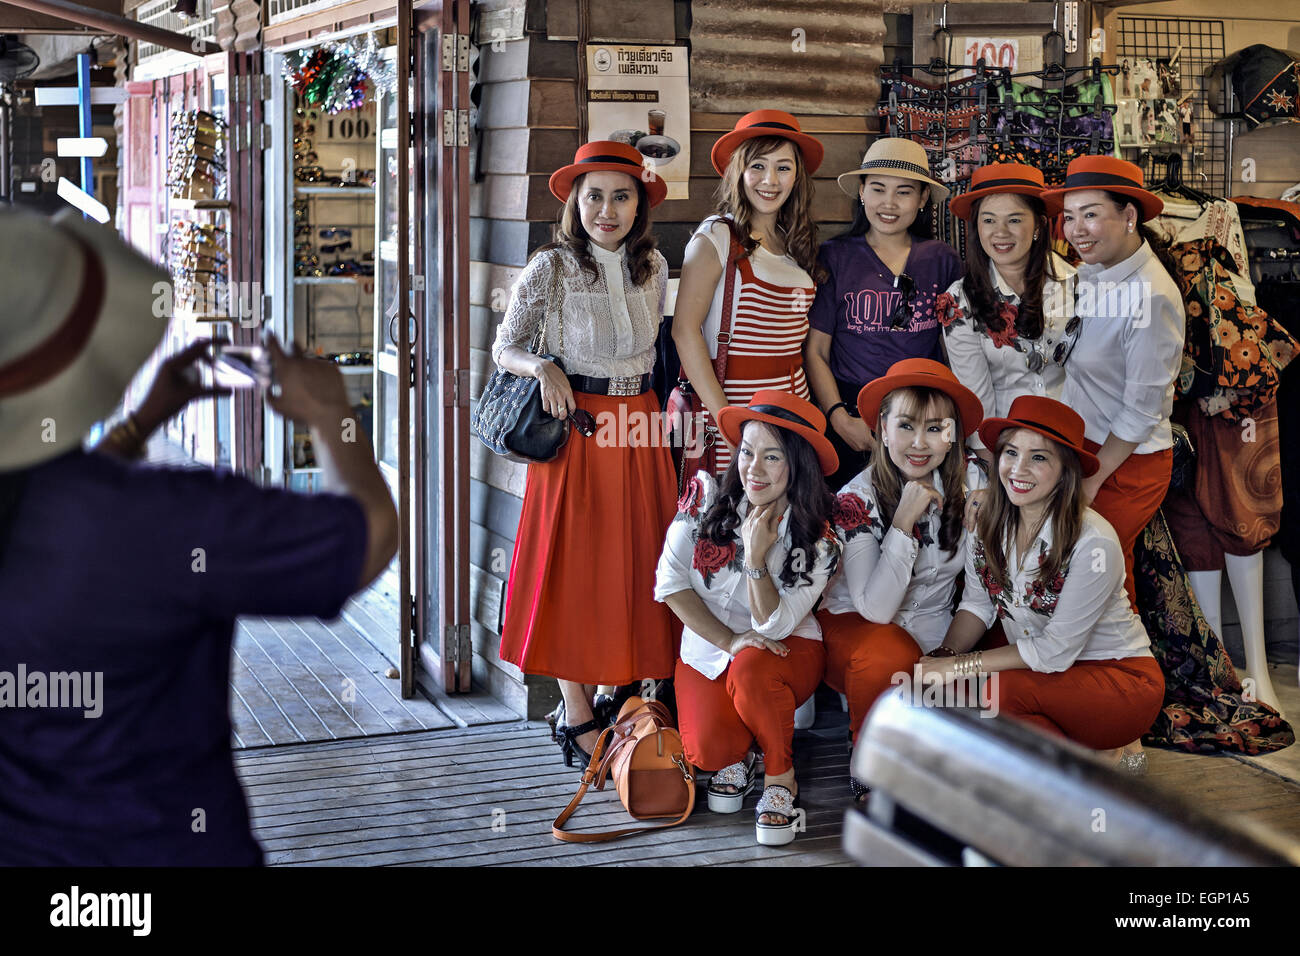 Matching clothes. Group of women in matching red outfits pose for a photograph. Thailand Southeast Asia Stock Photo